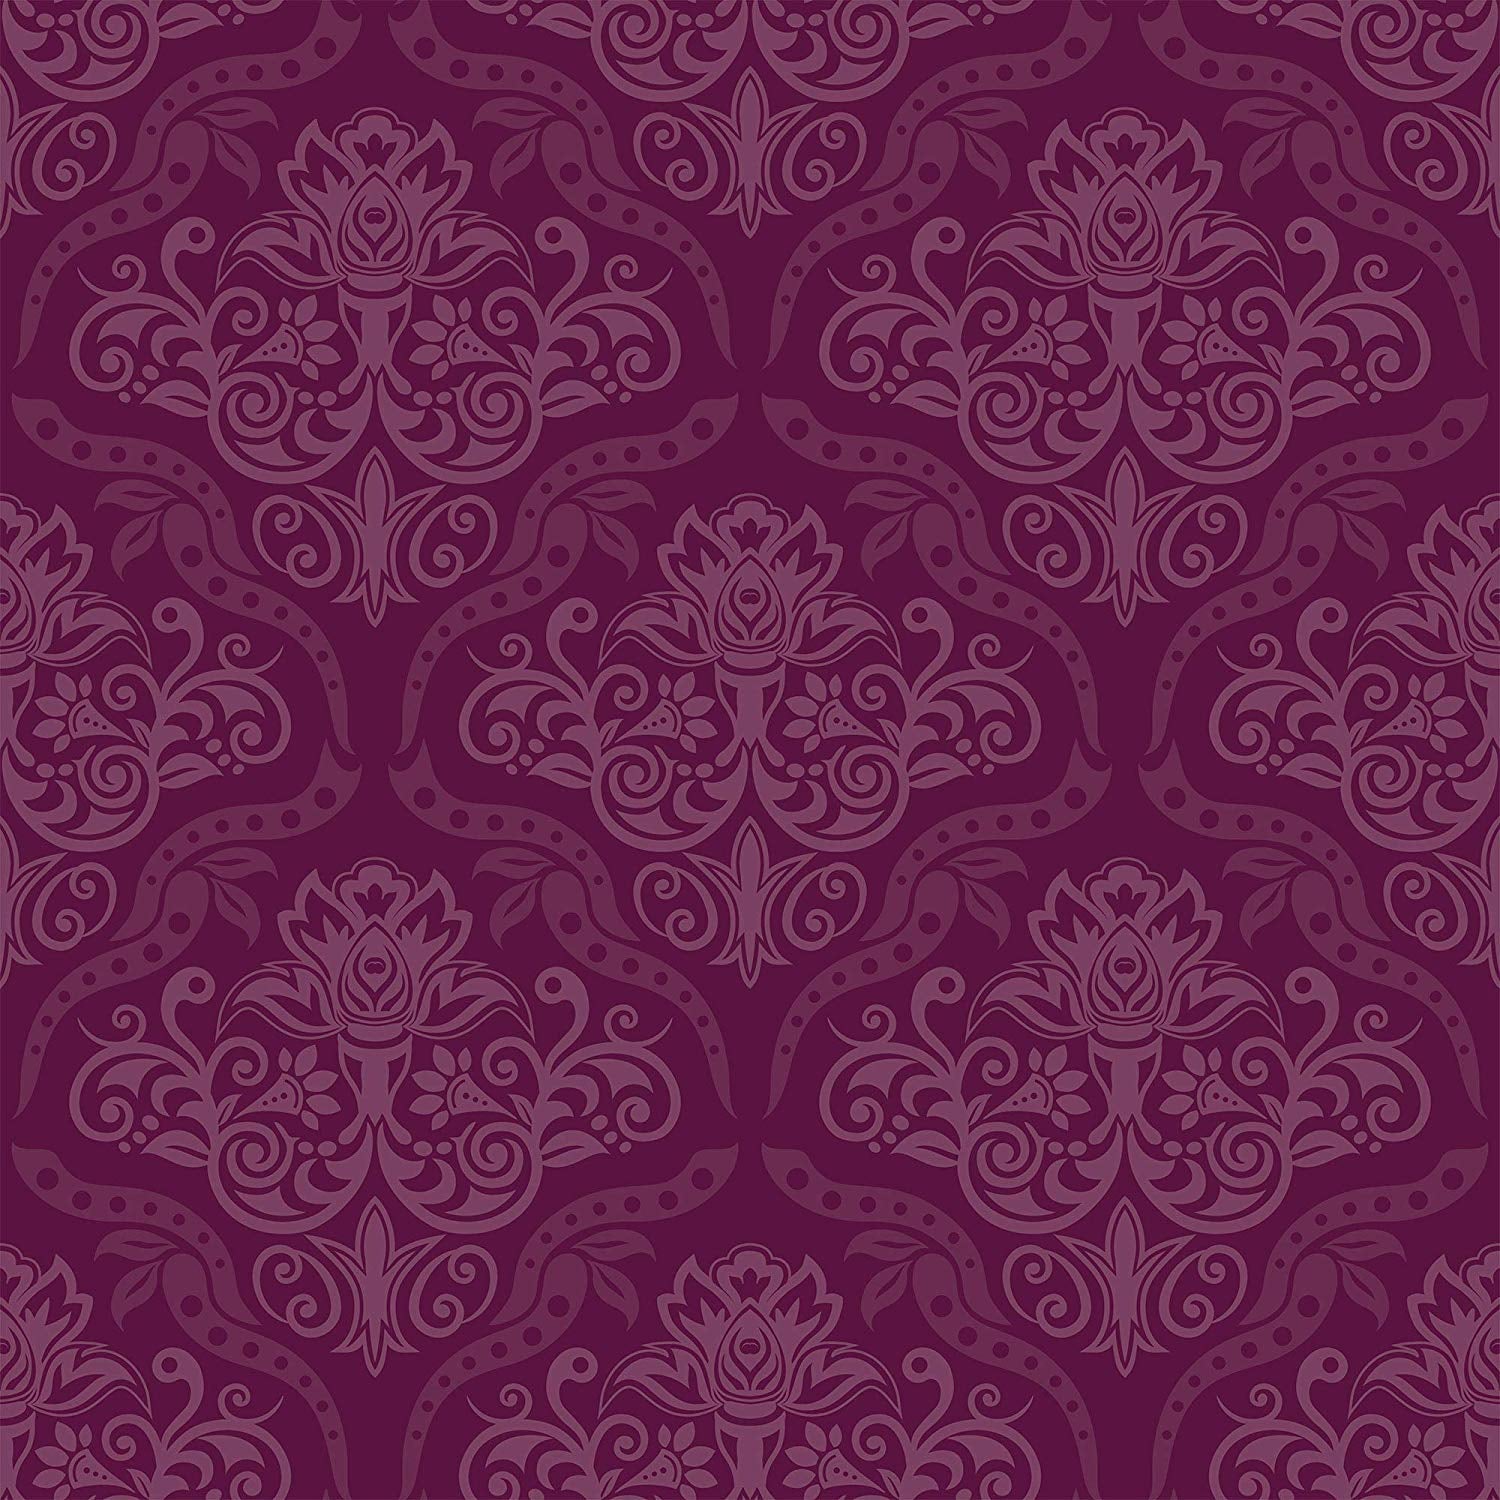 Buy Asian Paints S107XF07A15 EzyCR8 45x300cm Paper Purple Baroque Florals  Water Resistant Self Adhesive Wallpaper HPCA24401 Online At Best Price On  Moglix